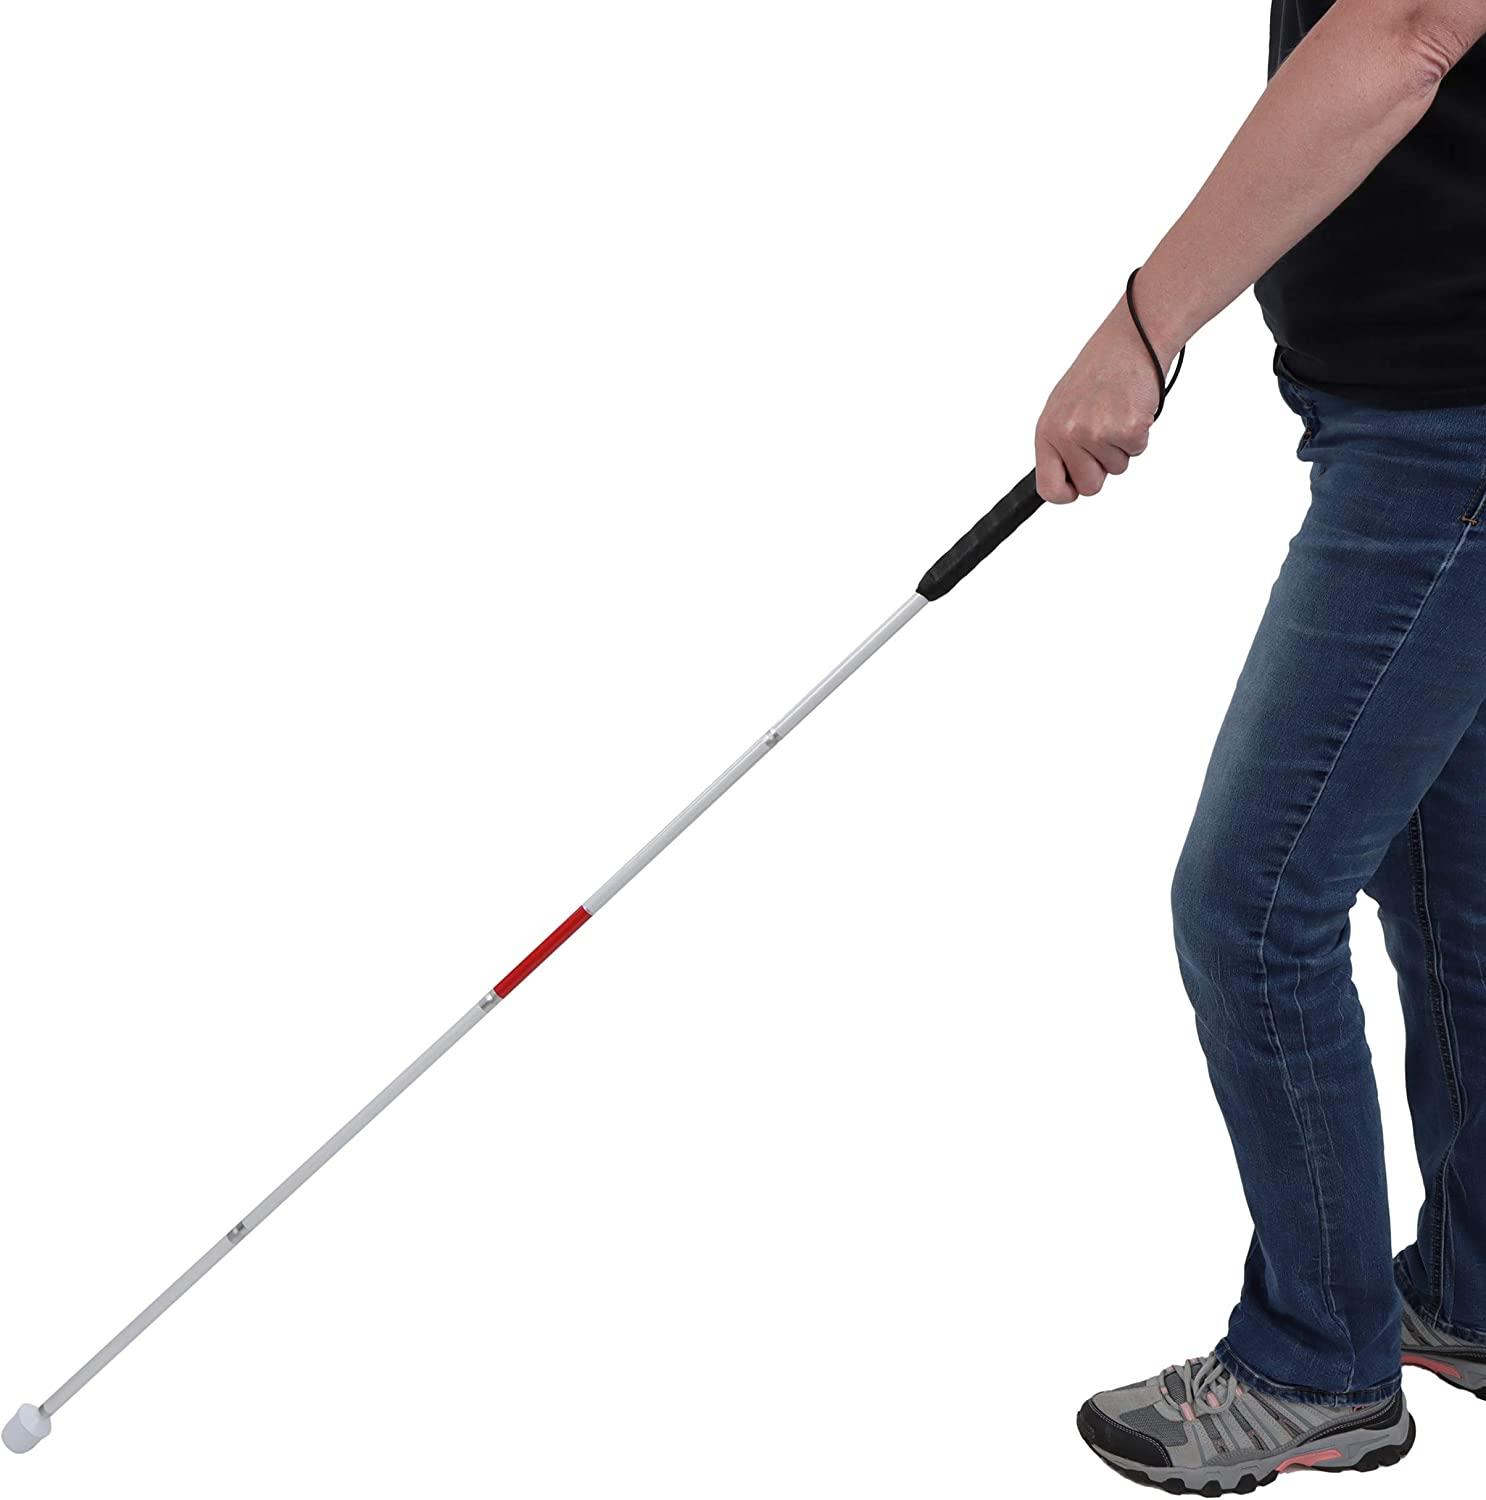 Mybow Folding Blind Walking Stick White Cane for The Blind Person Mobility  Guide Cane Reflective Red - 49 inch Collapsible Aluminum Canes Equipment